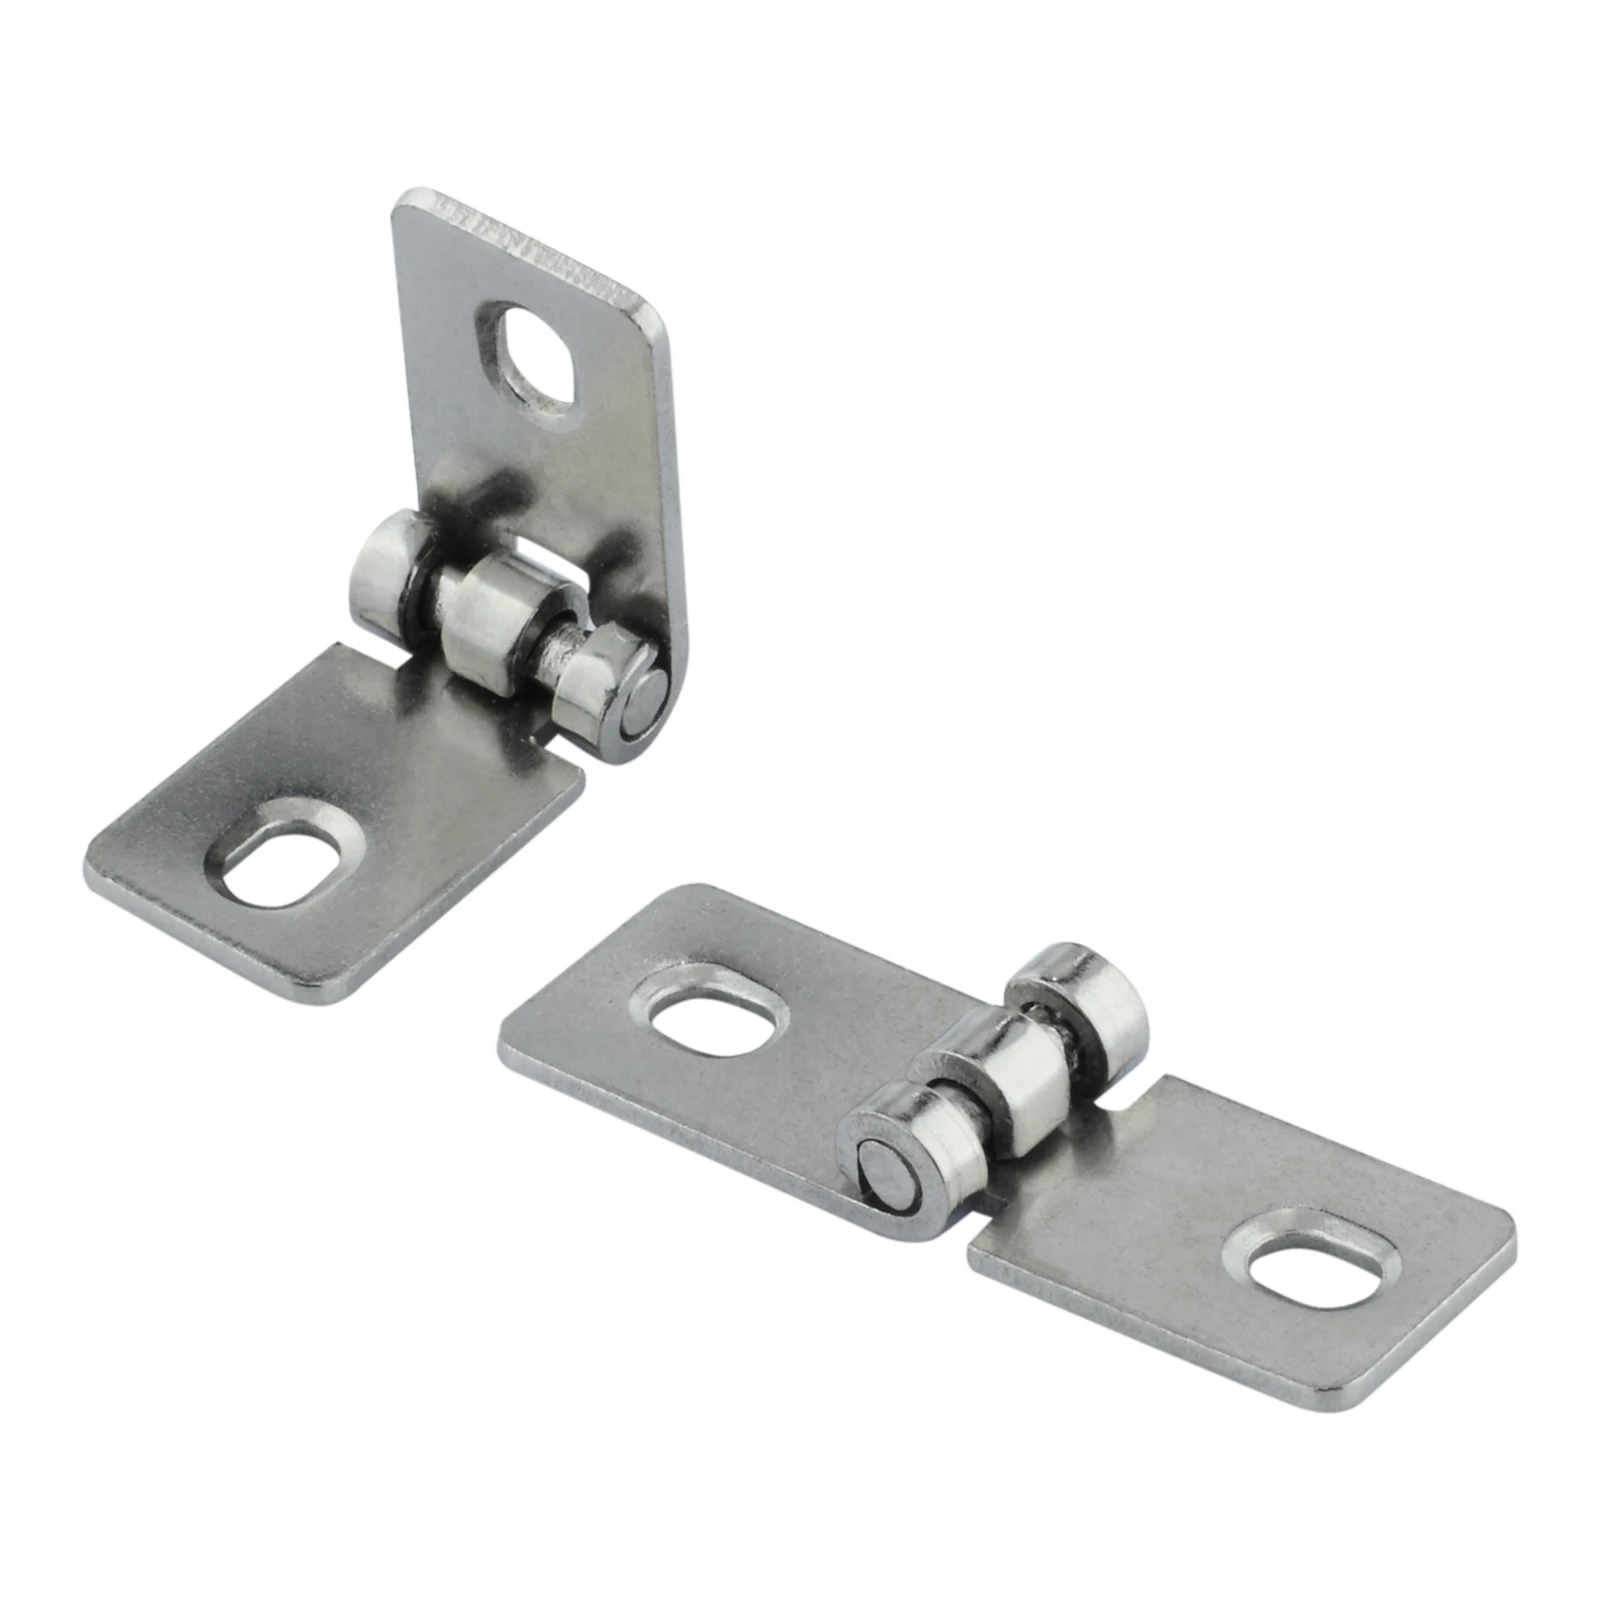 2Pcs Stainless Steel Nothing Frame Hinge Fold Nothing Frame Balcony Window Decorative Hinges for Vintage Wooden Box with Screws